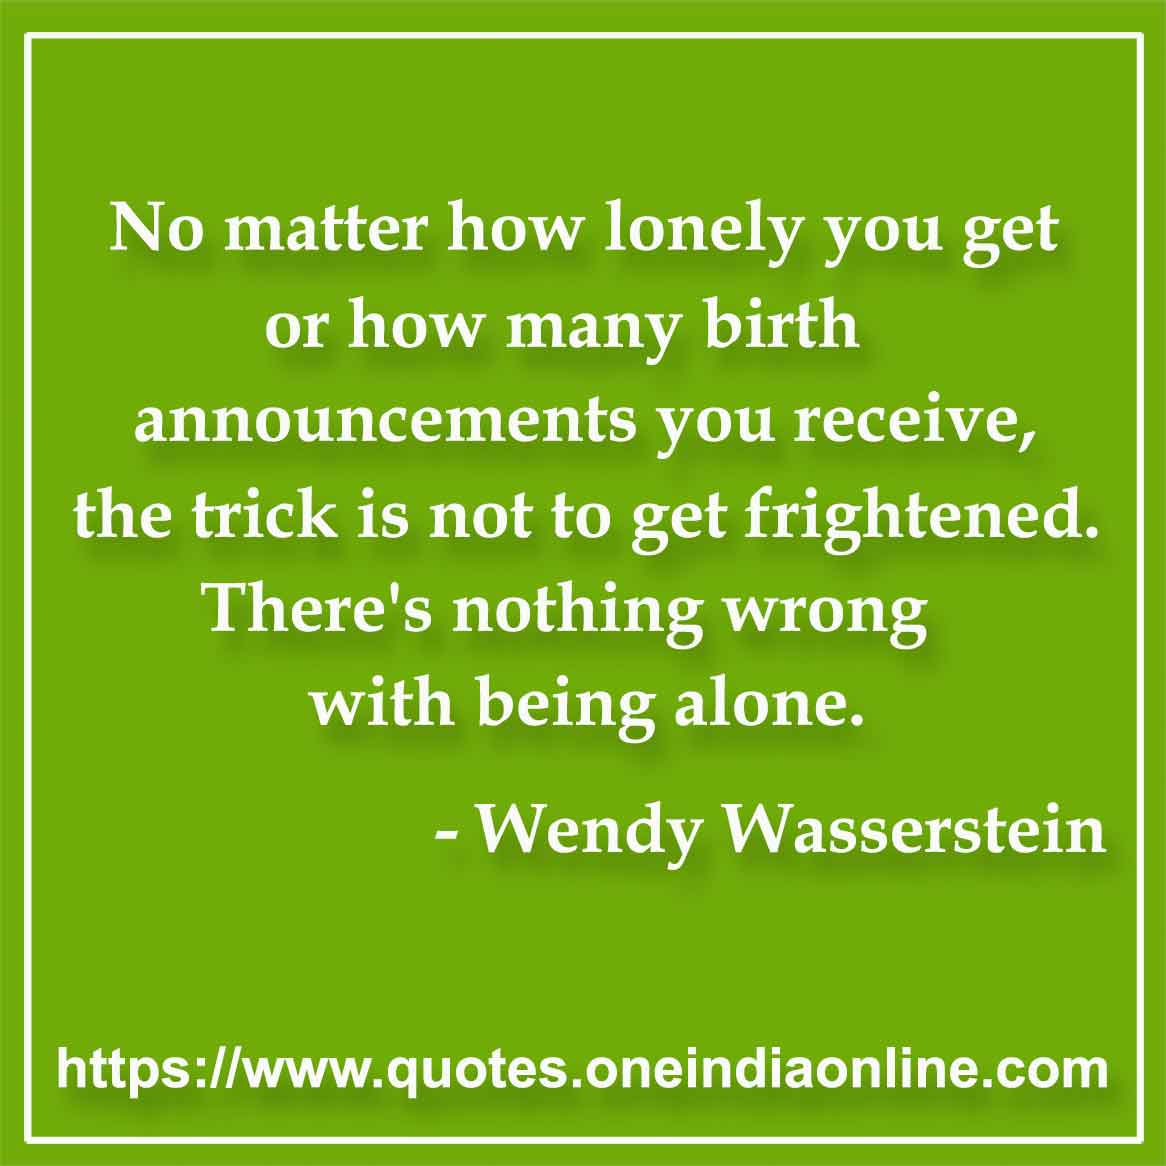 No matter how lonely you get or how many birth announcements you receive, the trick is not to get frightened. There's nothing wrong with being alone.

- Wendy Wasserstein Quotes